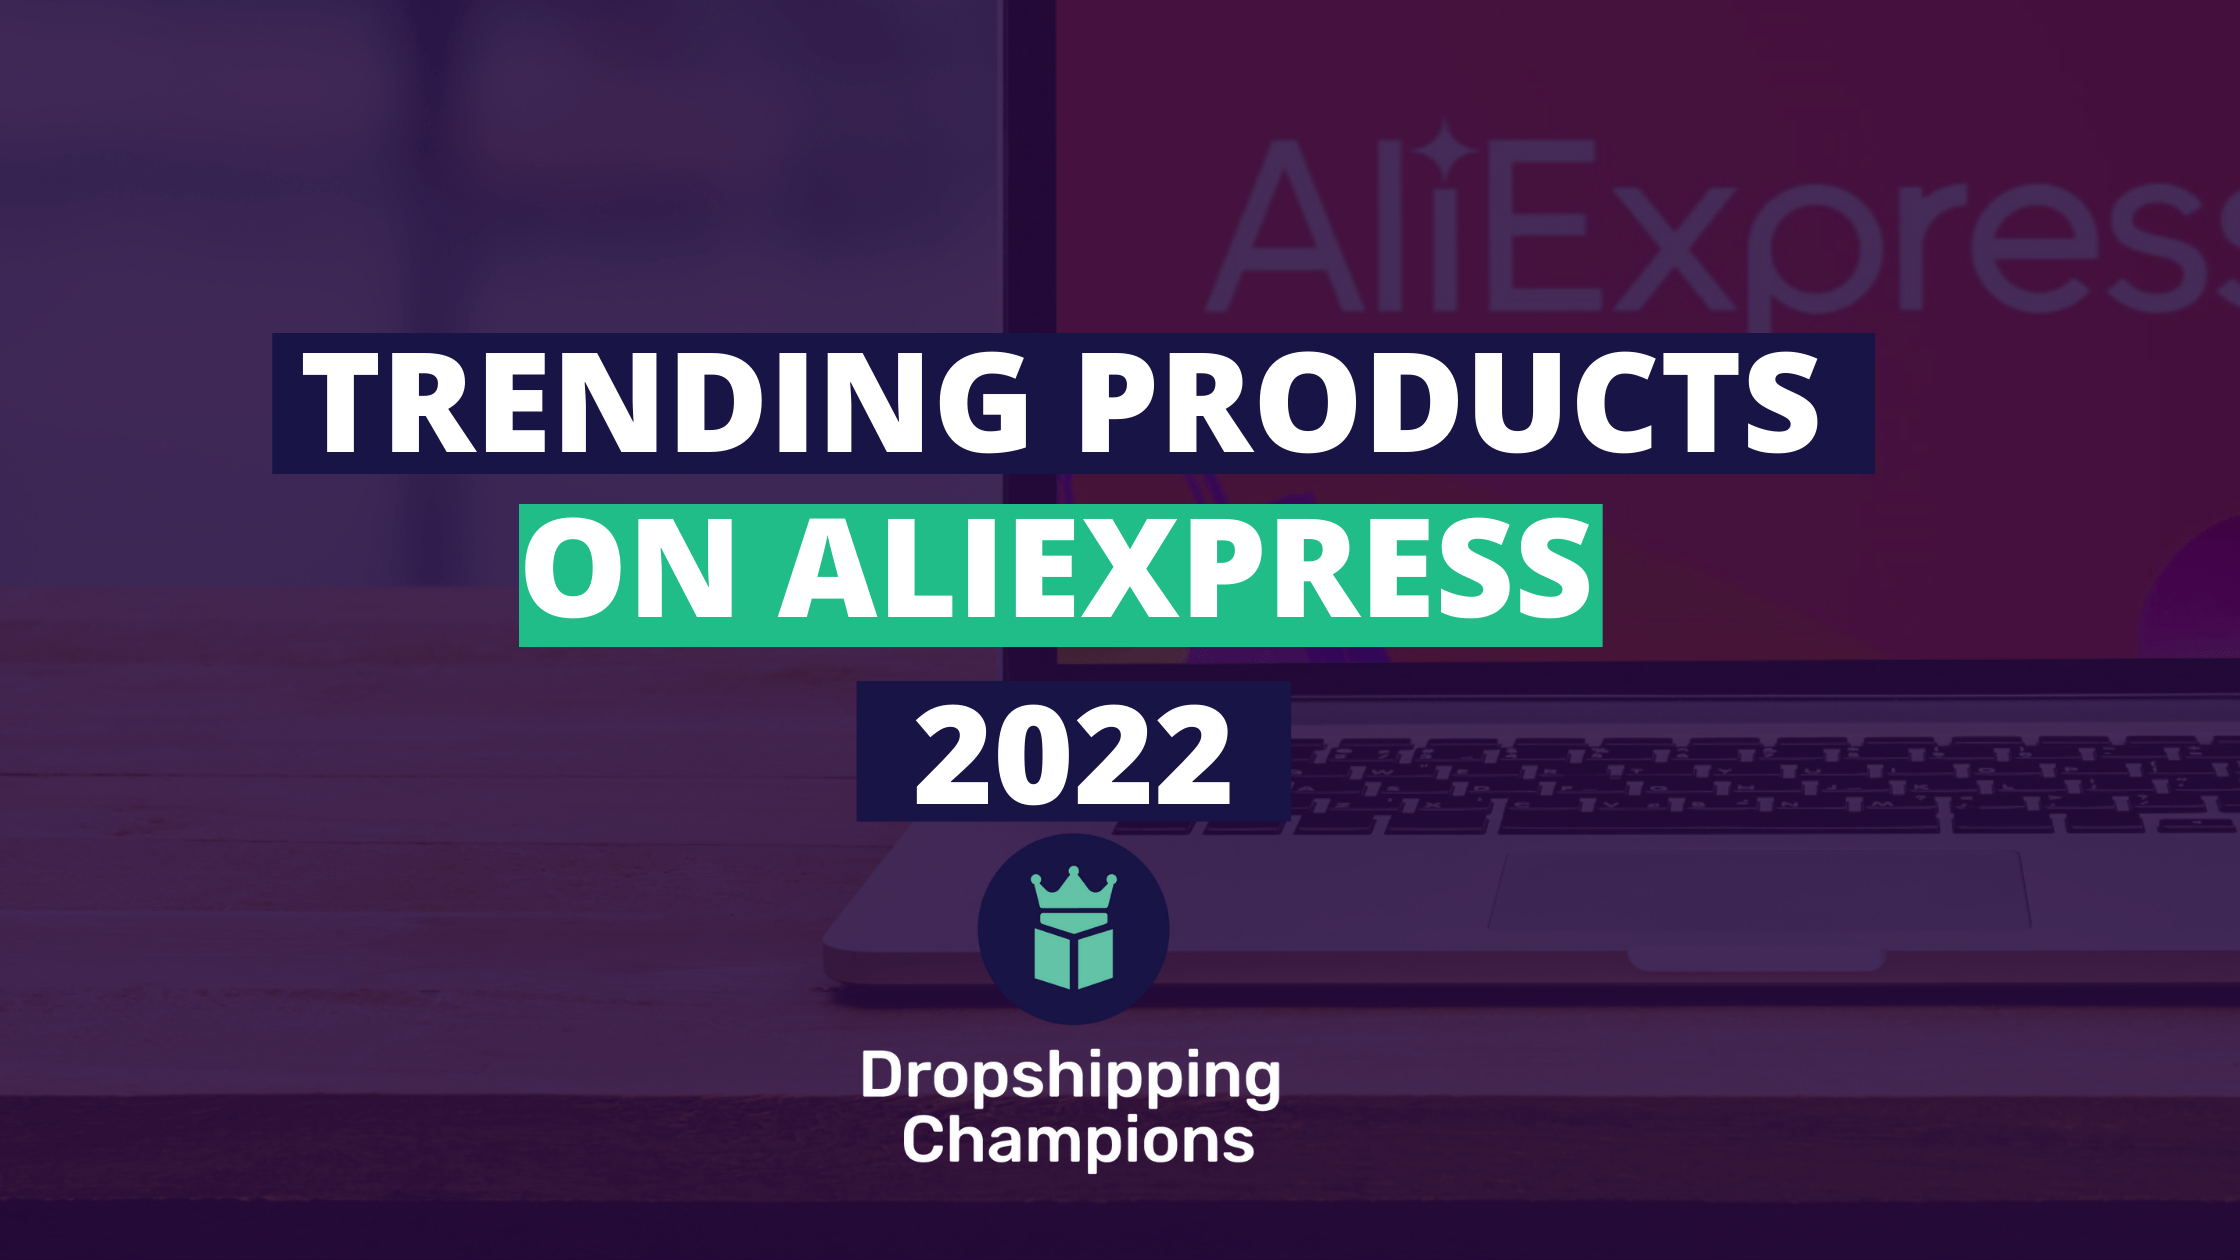 <strong>Trending Products on Aliexpress in 2022</strong>